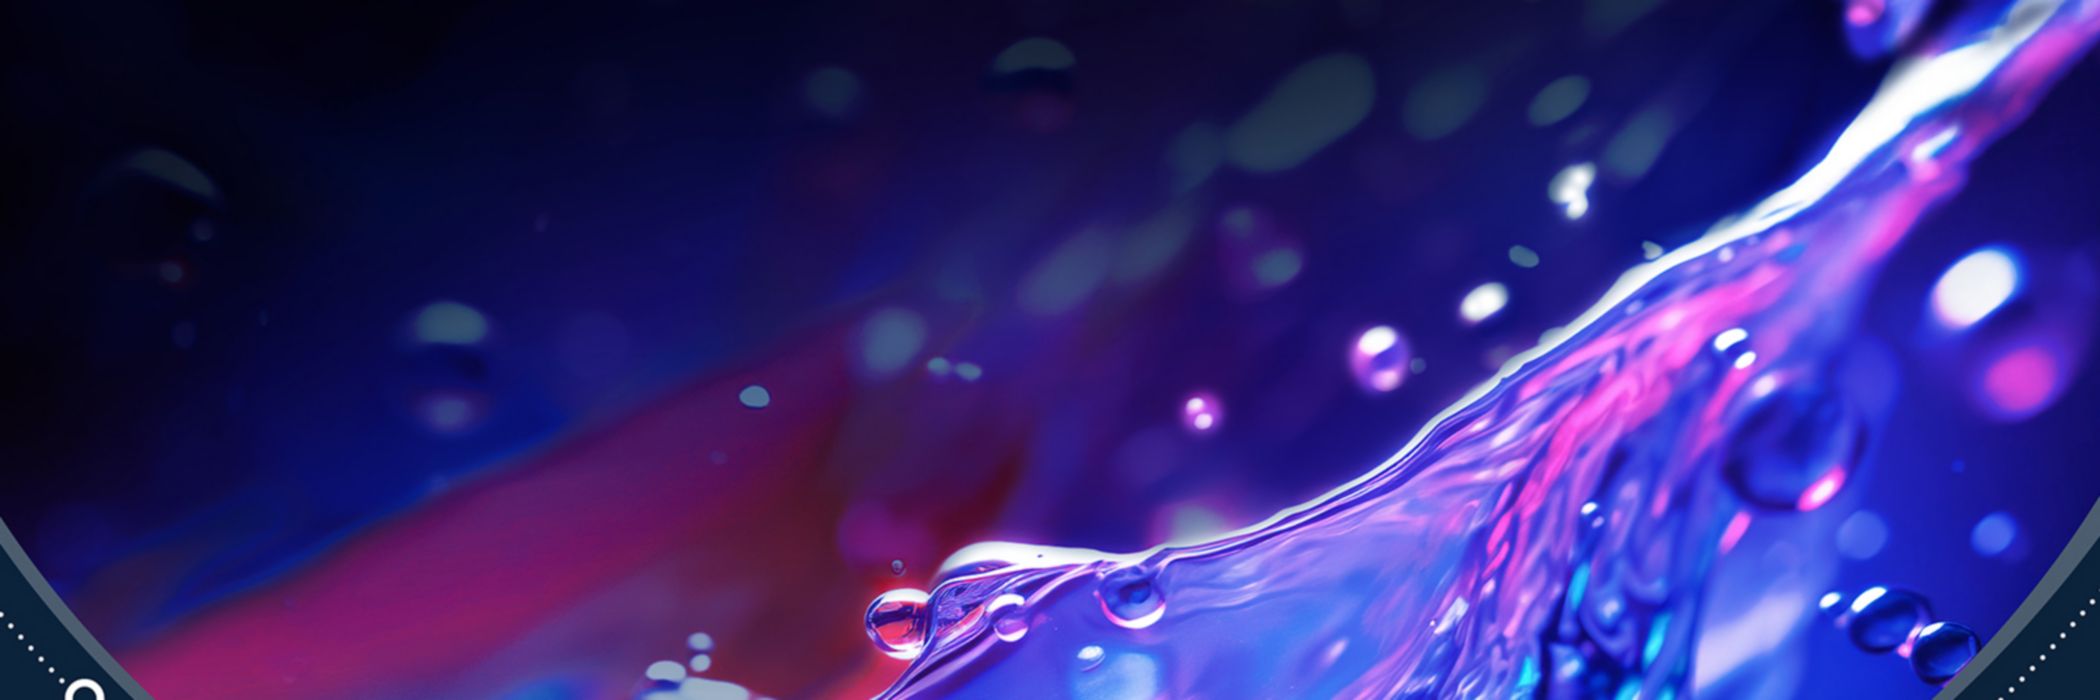 Pink and blue flowing Water droplets